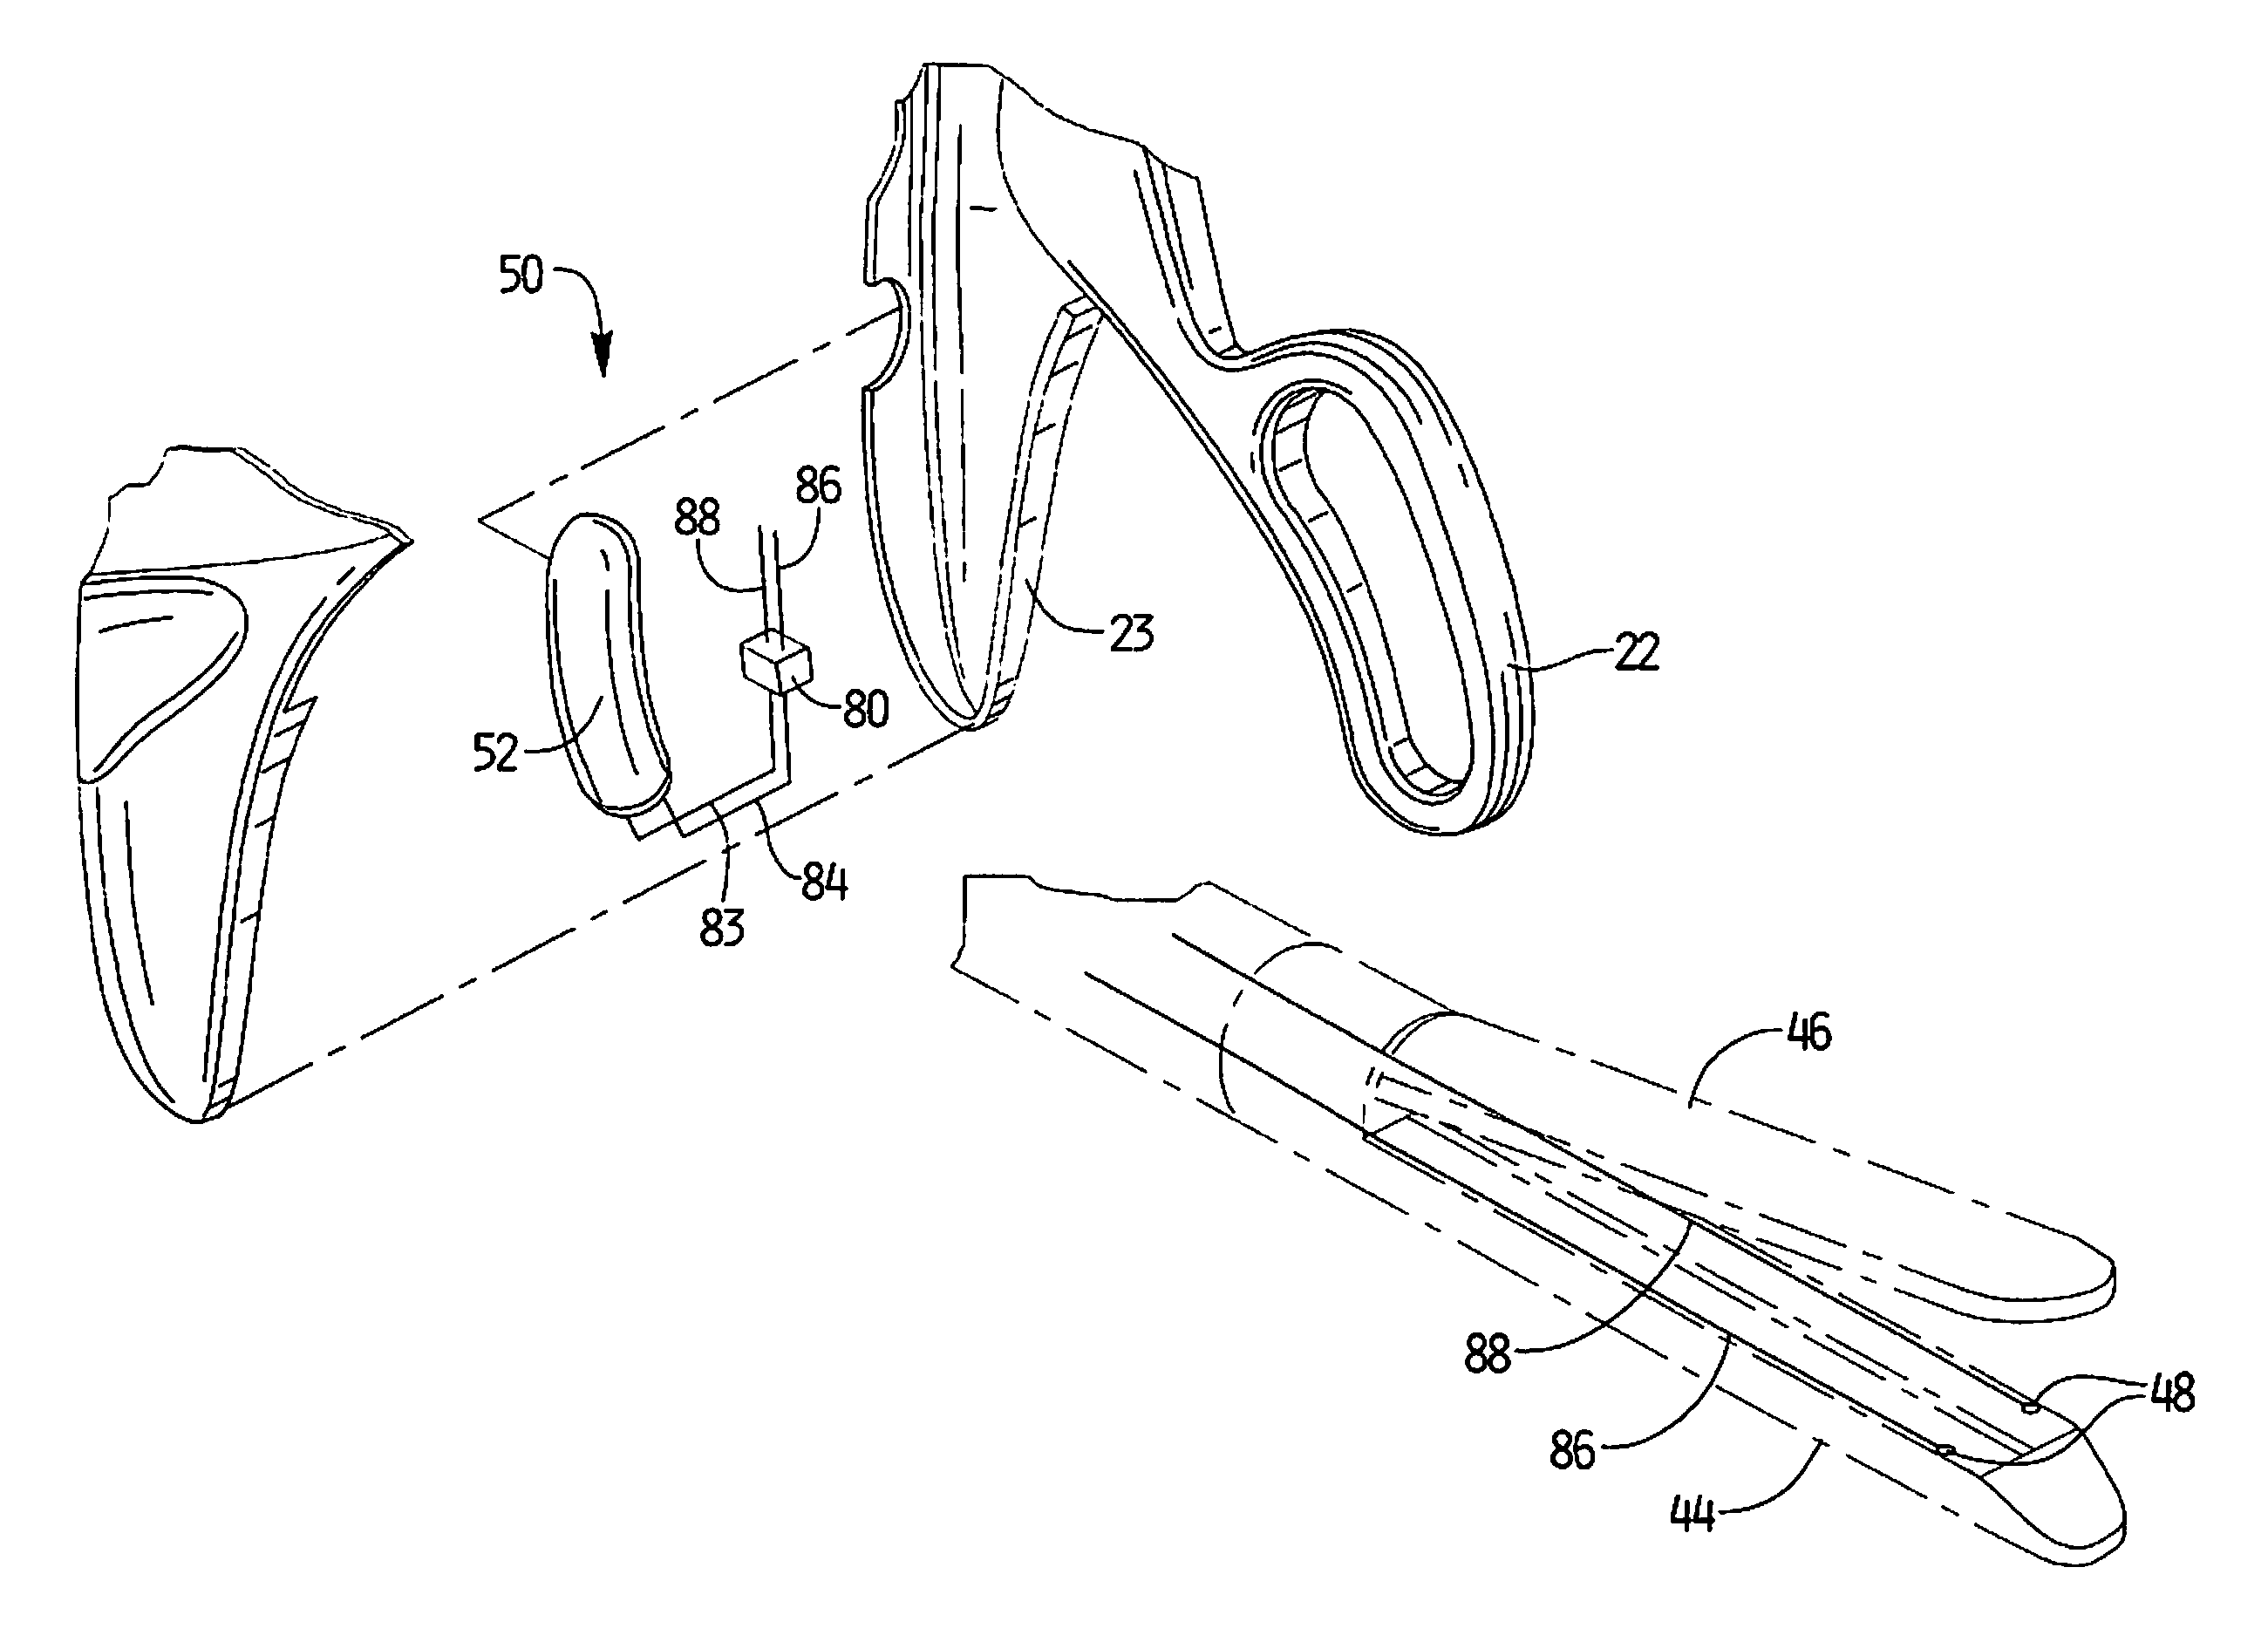 Surgical stapler with tactile feedback system